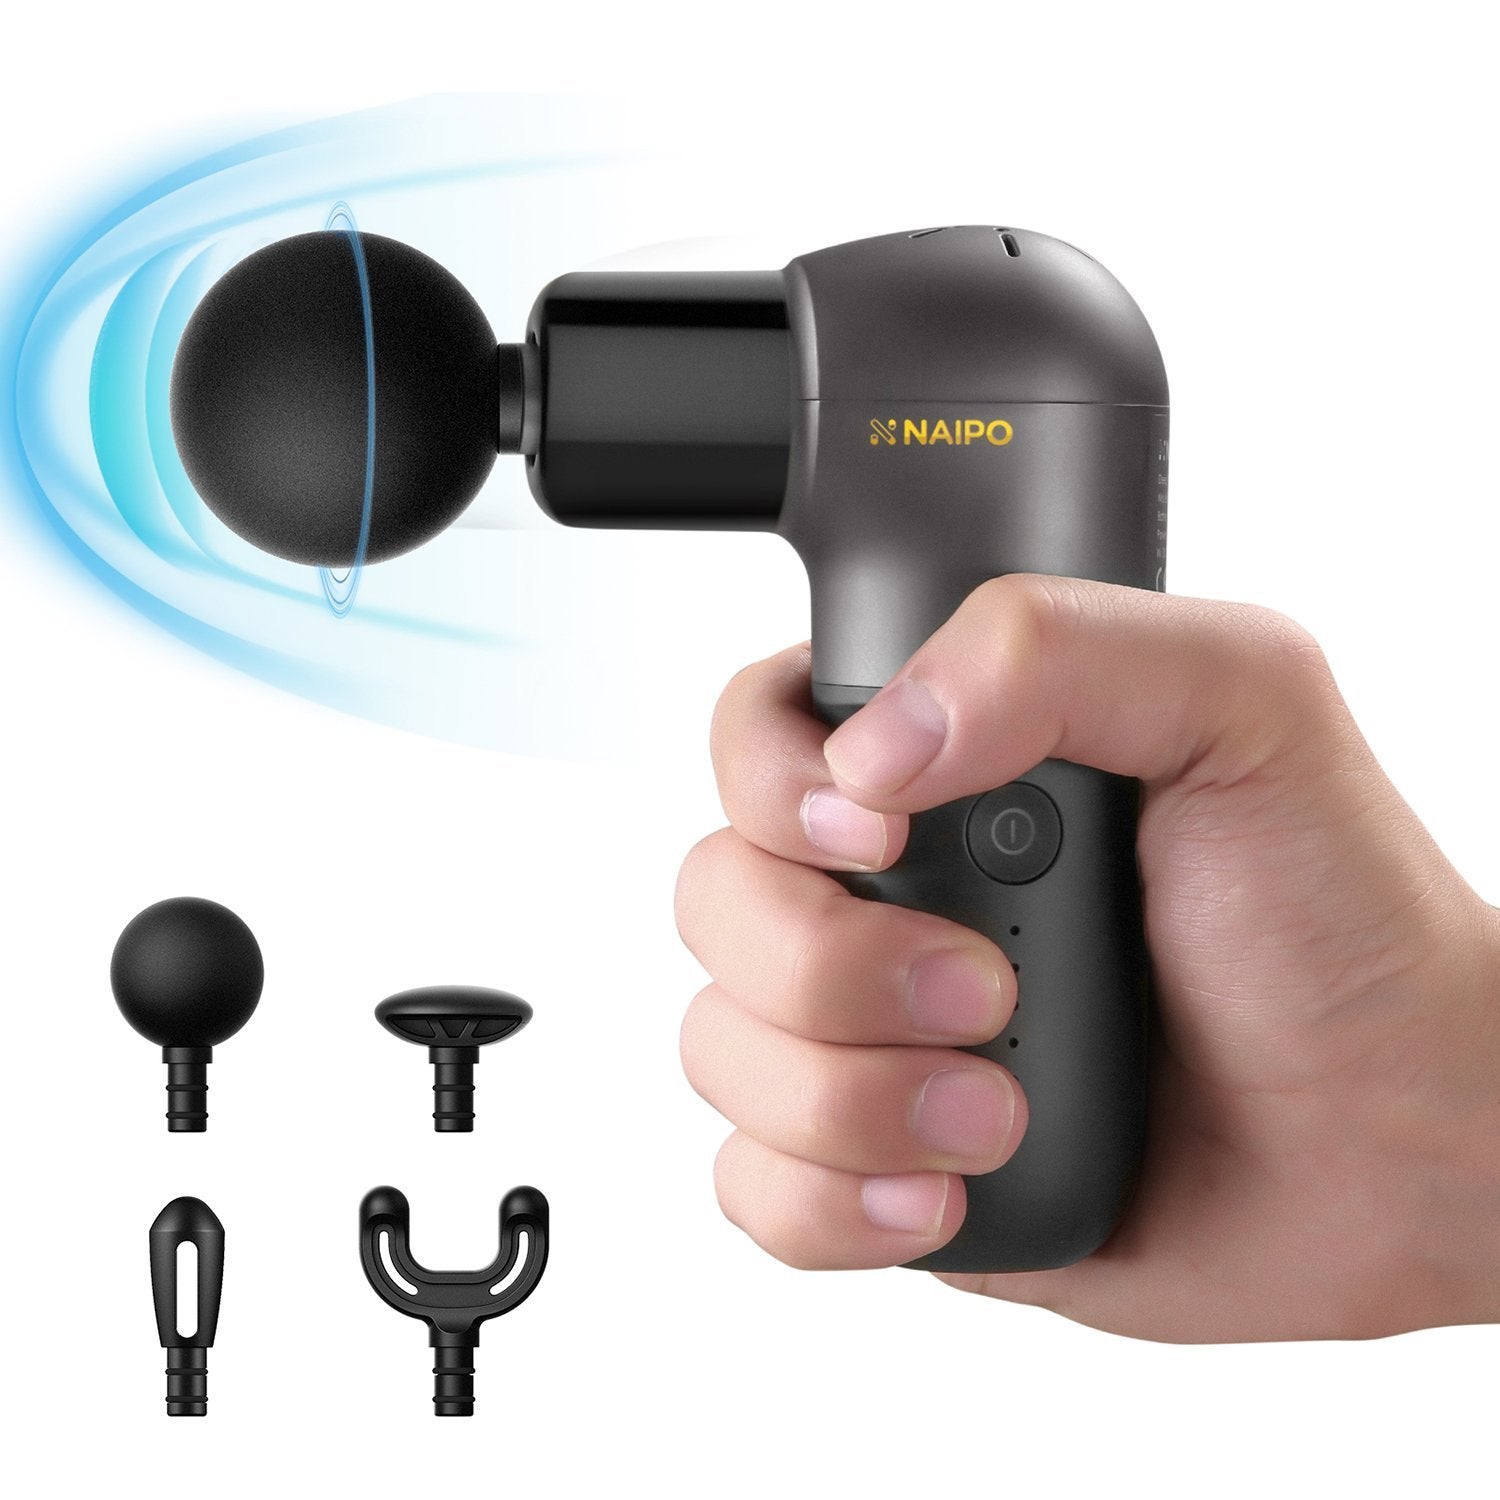 Load image into Gallery viewer, Naipo Mini Deep Tissue Percussion Massage Gun | Super Light and Portable, 5 Speeds, 4 Interchangeable Heads - NAIPO
